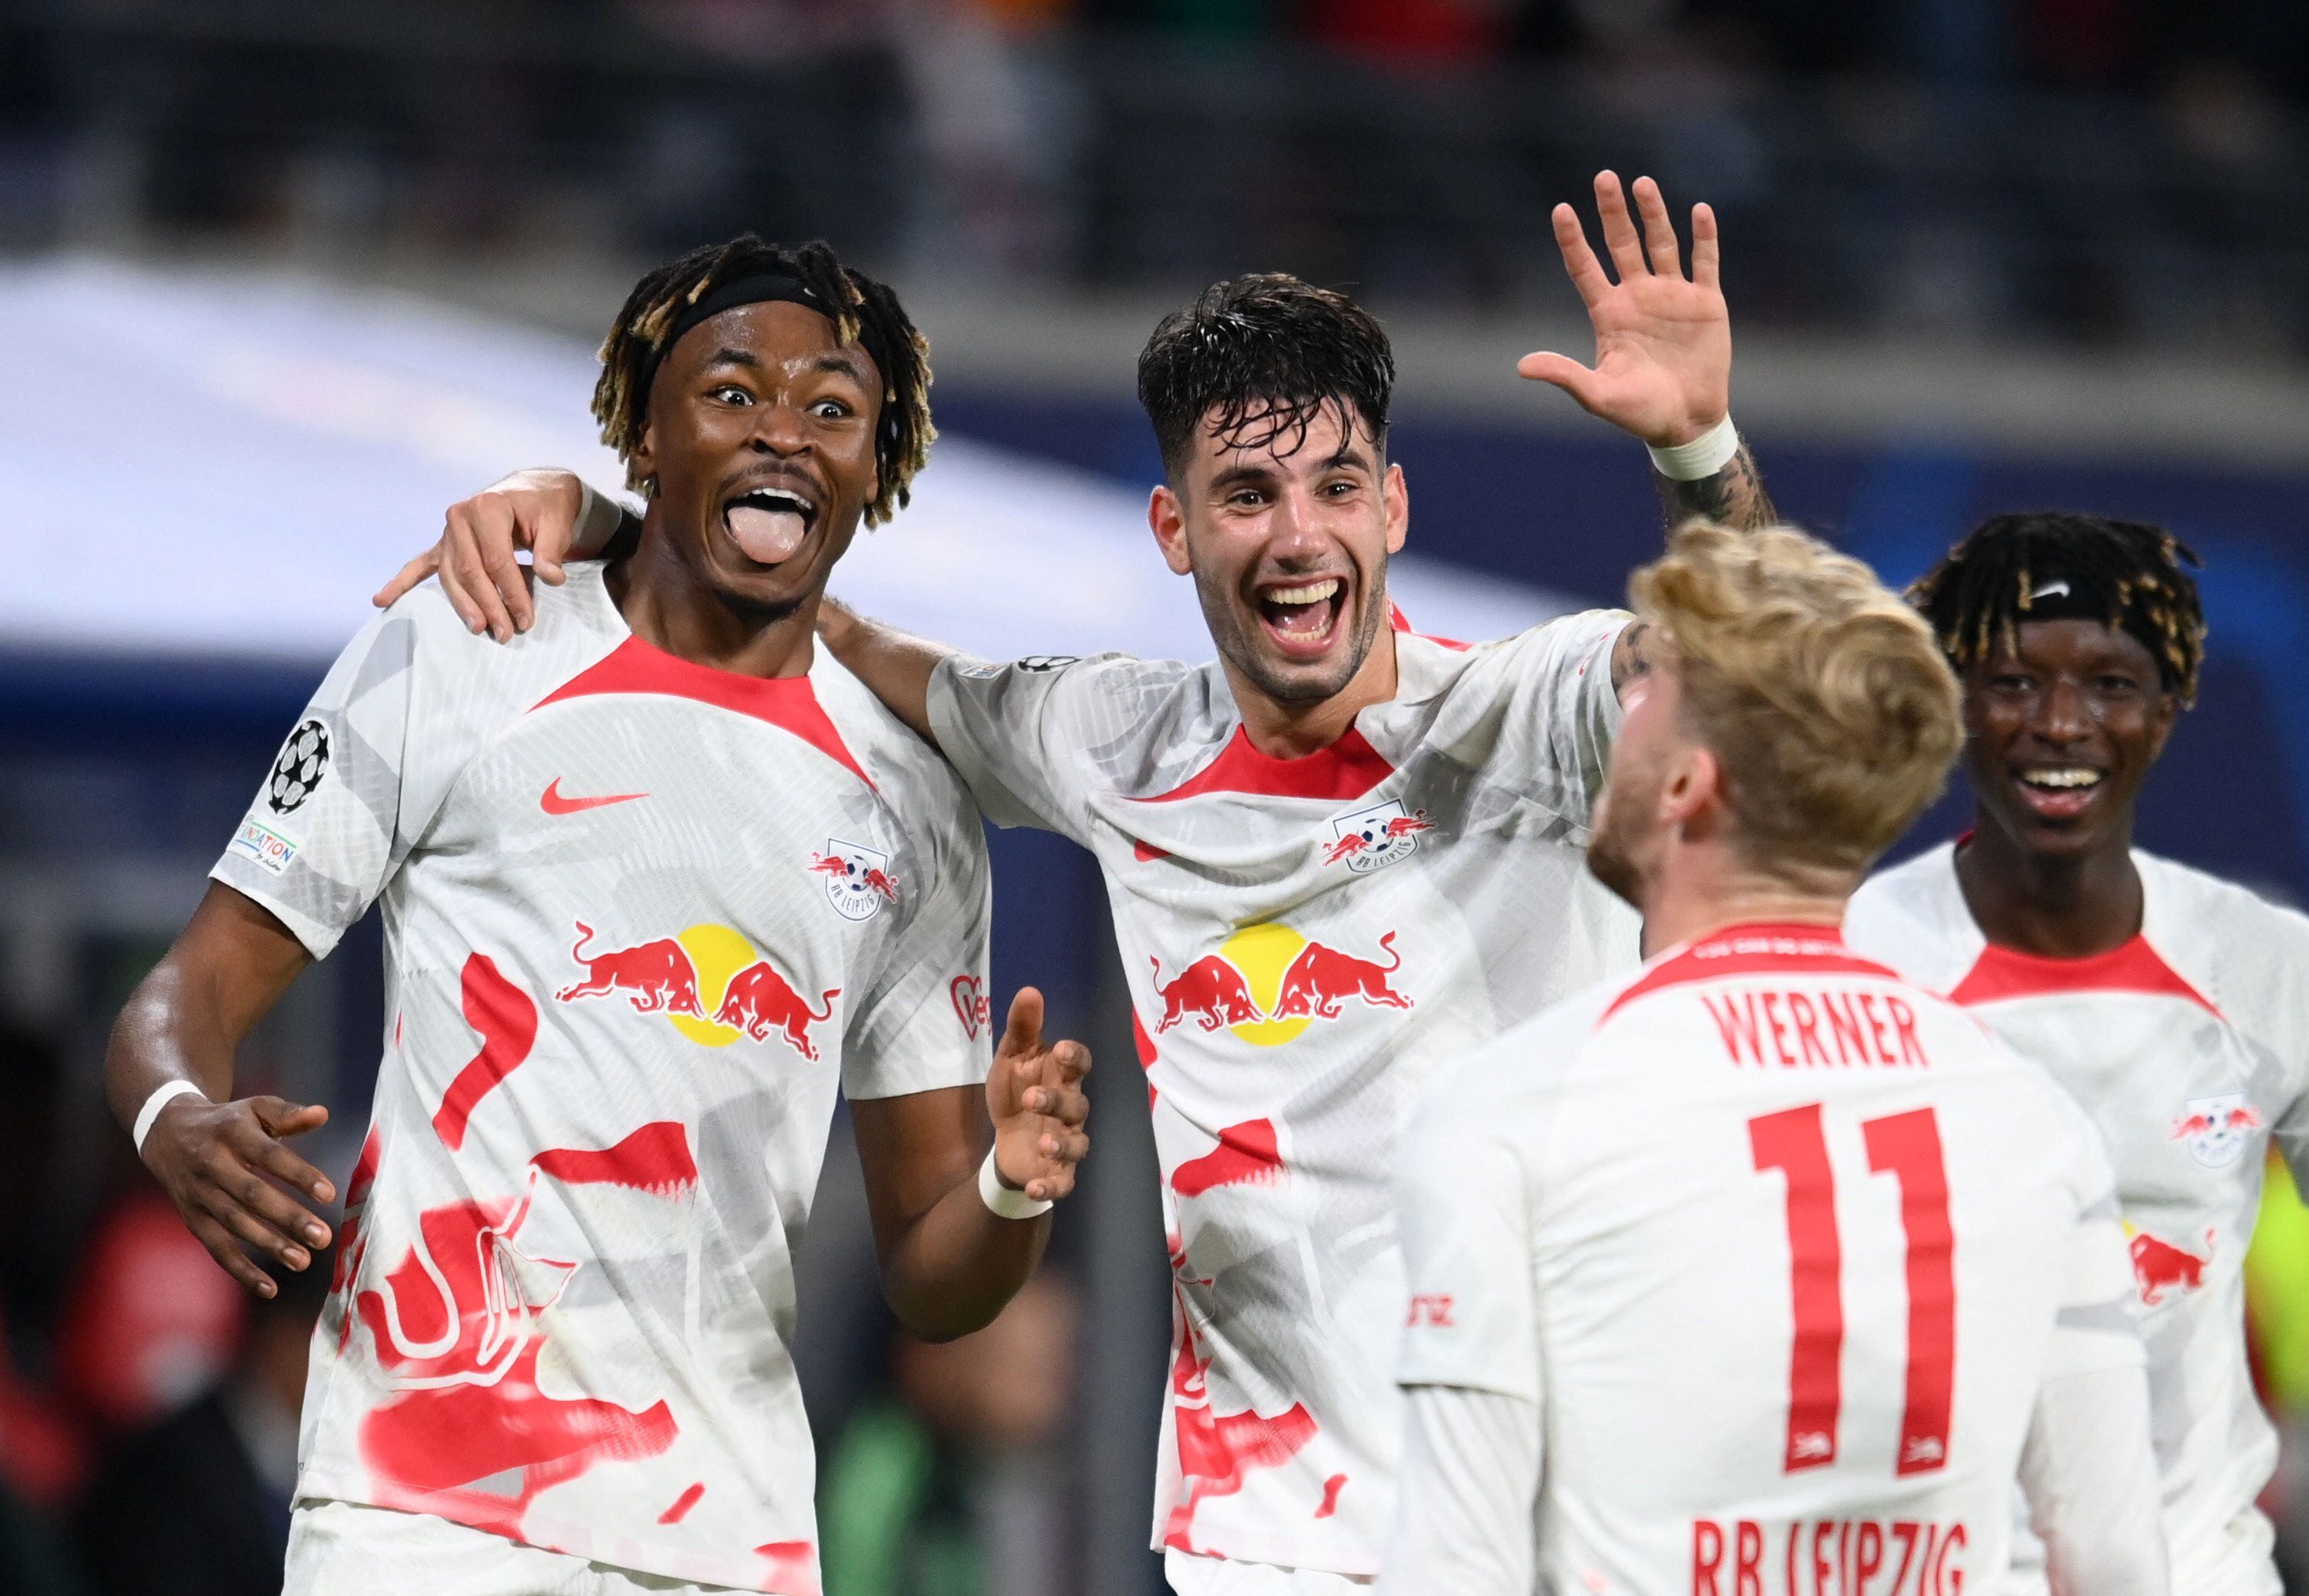 Soccer Football - Champions League - Group F - RB Leipzig v Real Madrid - Red Bull Arena, Leipzig, Germany - October 25, 2022 RB Leipzig's Timo Werner celebrates scoring their third goal with Mohamed Simakan and Dominik Szoboszlai REUTERS/Annegret Hilse